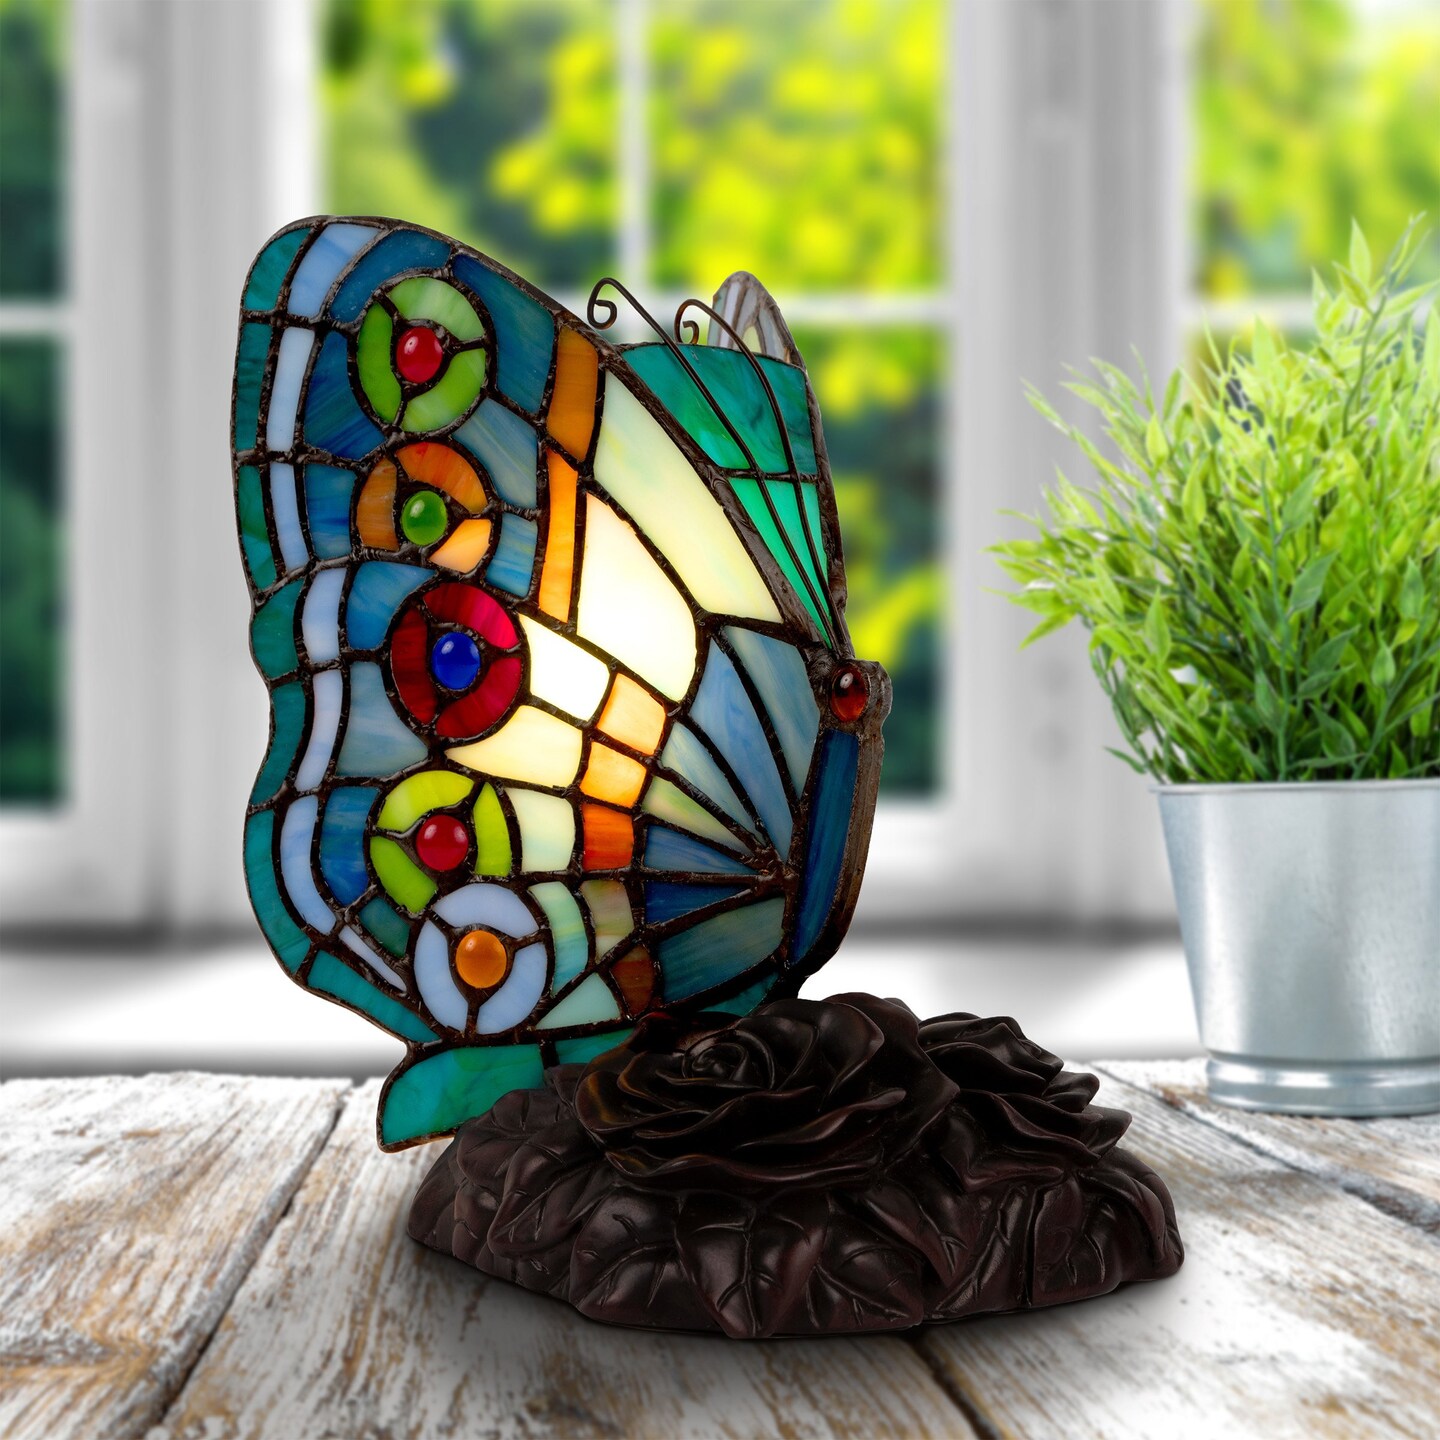 Lavish Home Tiffany Style Butterfly Lamp-Stained Glass Table or Desk Light LED Bulb Included-Vintage Look Colorful Accent Decor